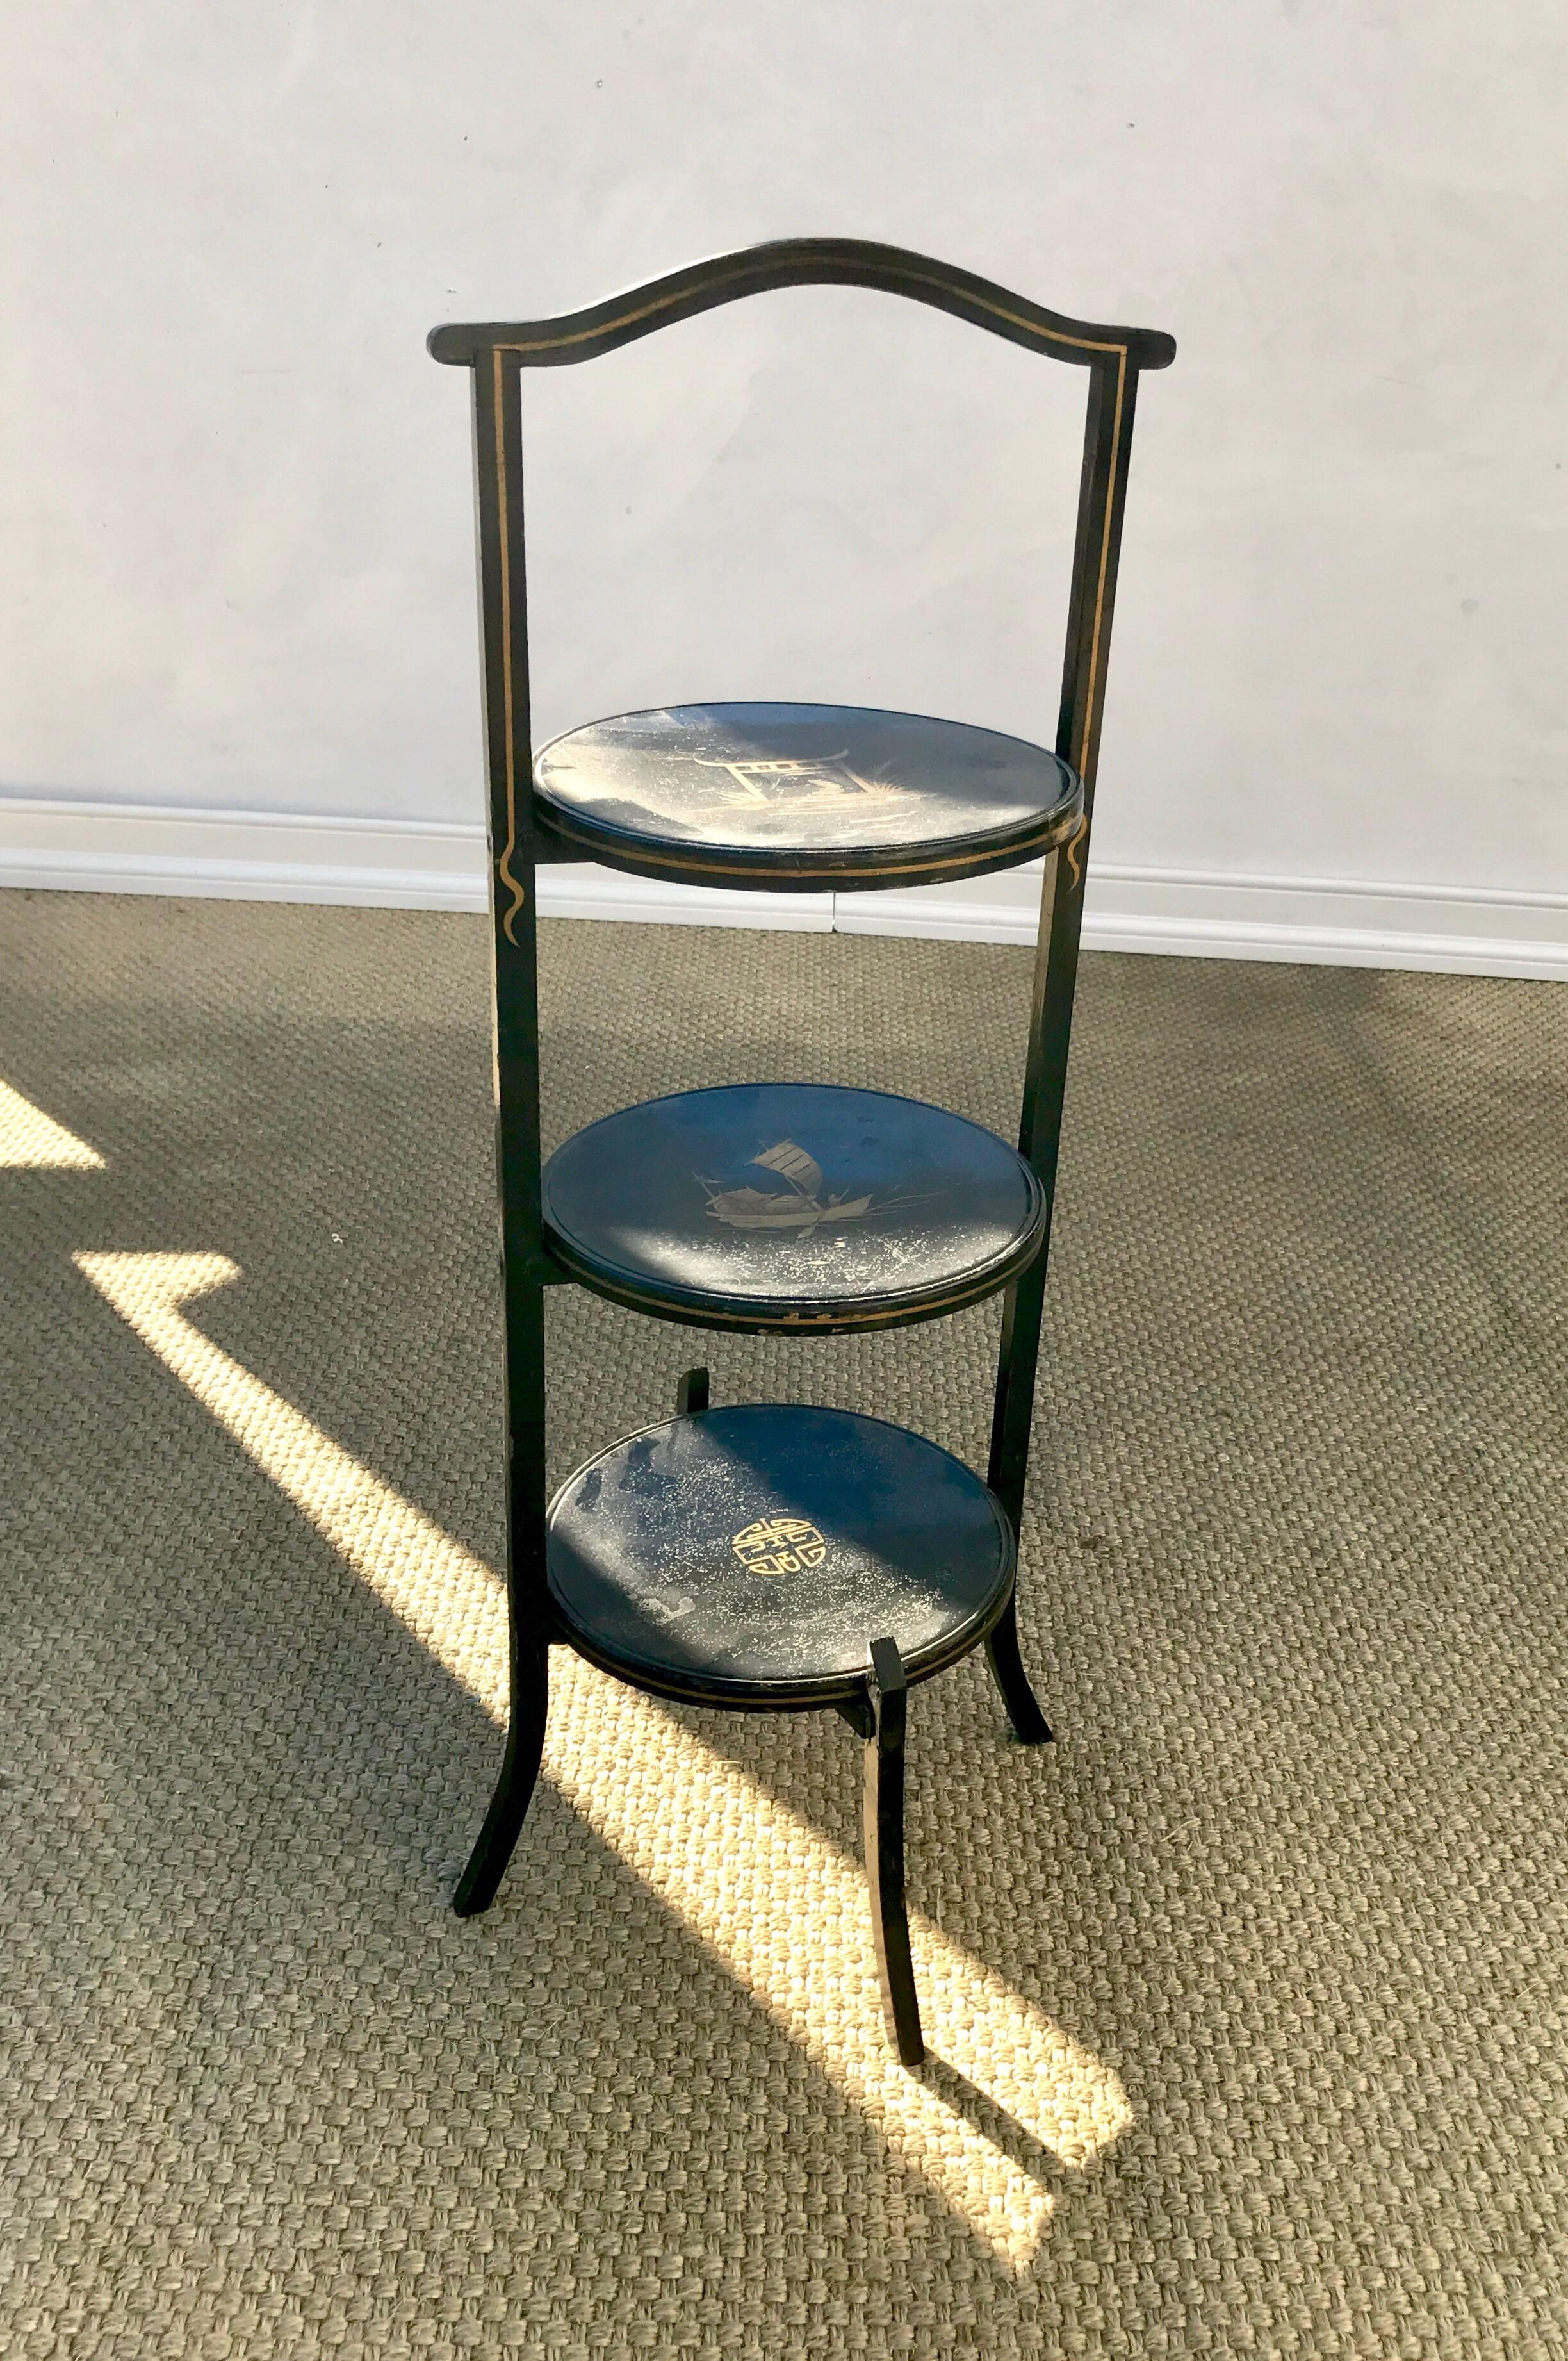 An ebonized three-tier chinoiserie painted muffin stand. The petite serving table is English was purchased outside of London by John Rosselli and Associates for the wonderful lady I recently purchased it from. The paint work is lovely and gives the